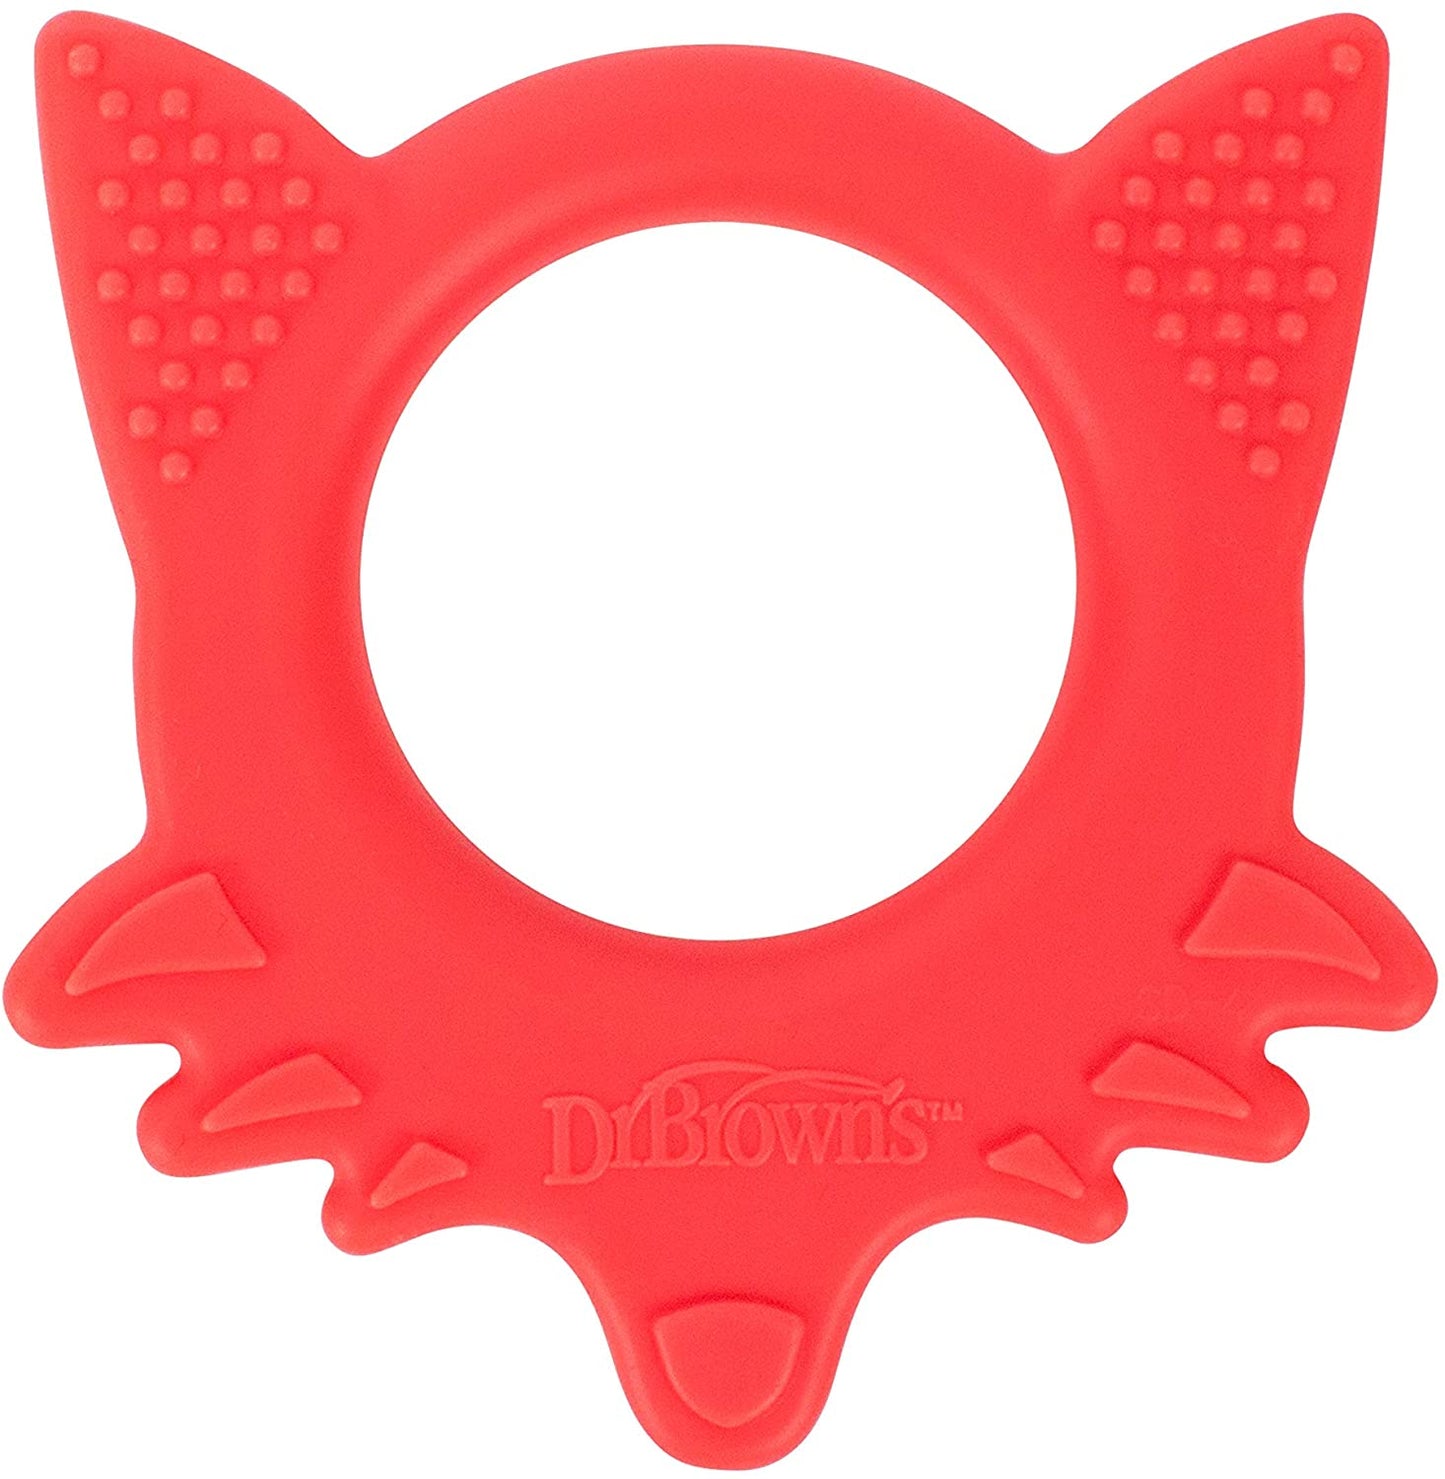 Dr.Brown's Flexees Friends Fox Teether - Red